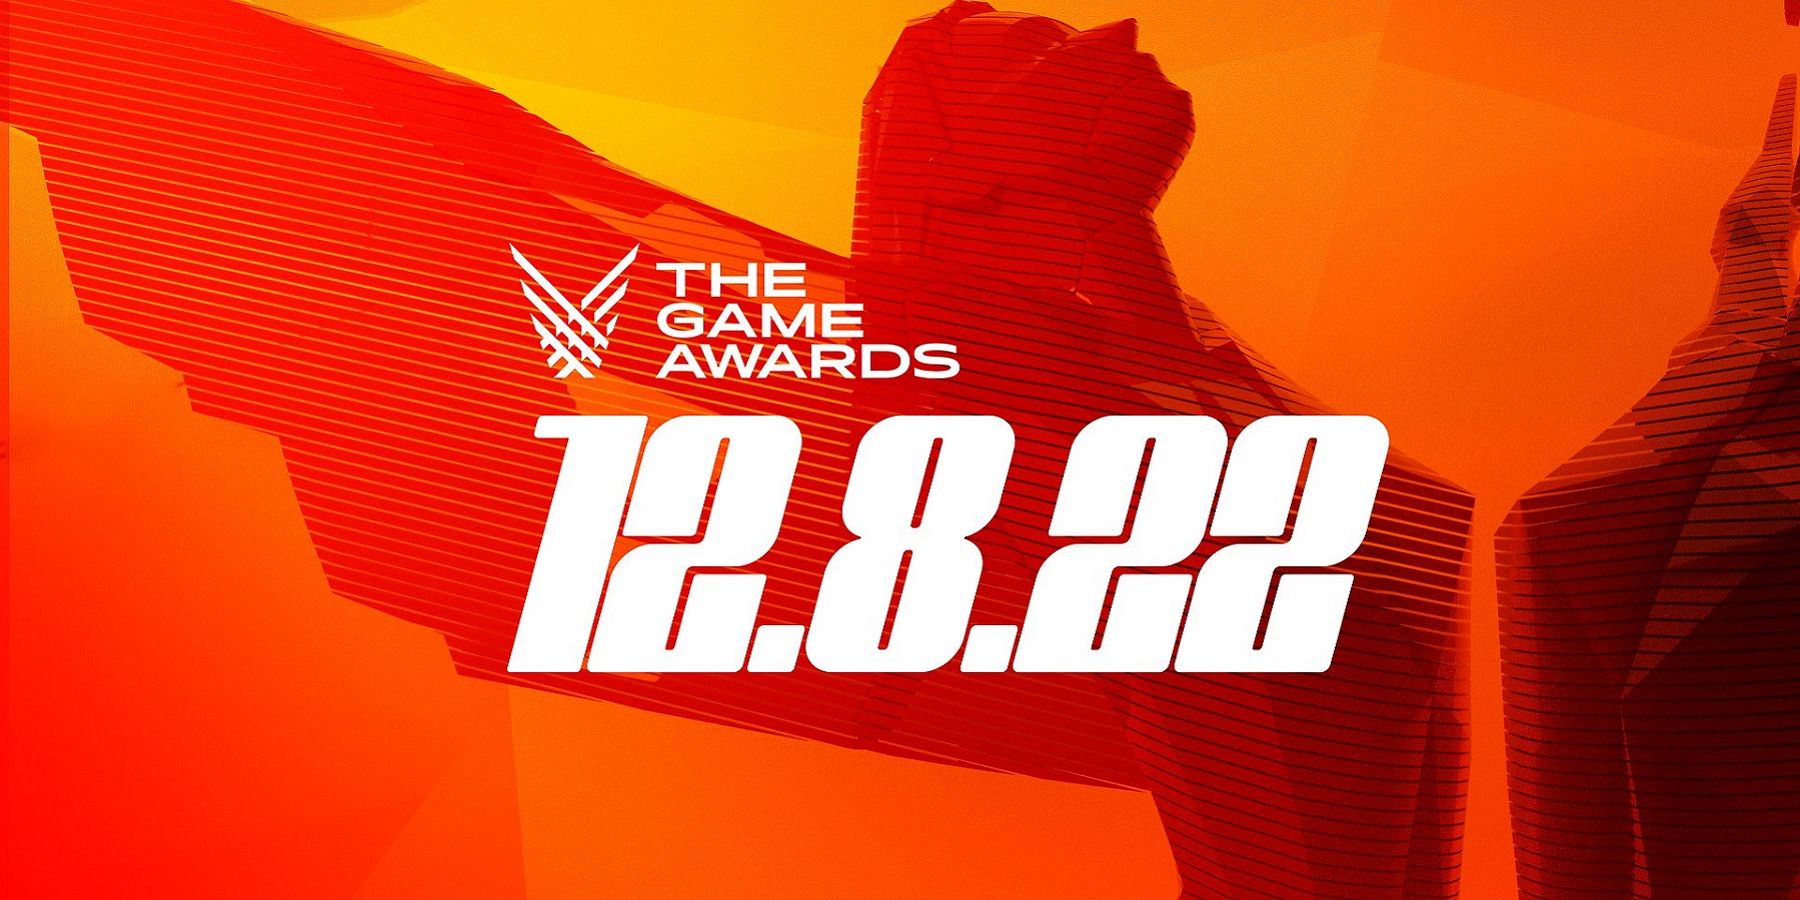 game awards 2022 logo and date